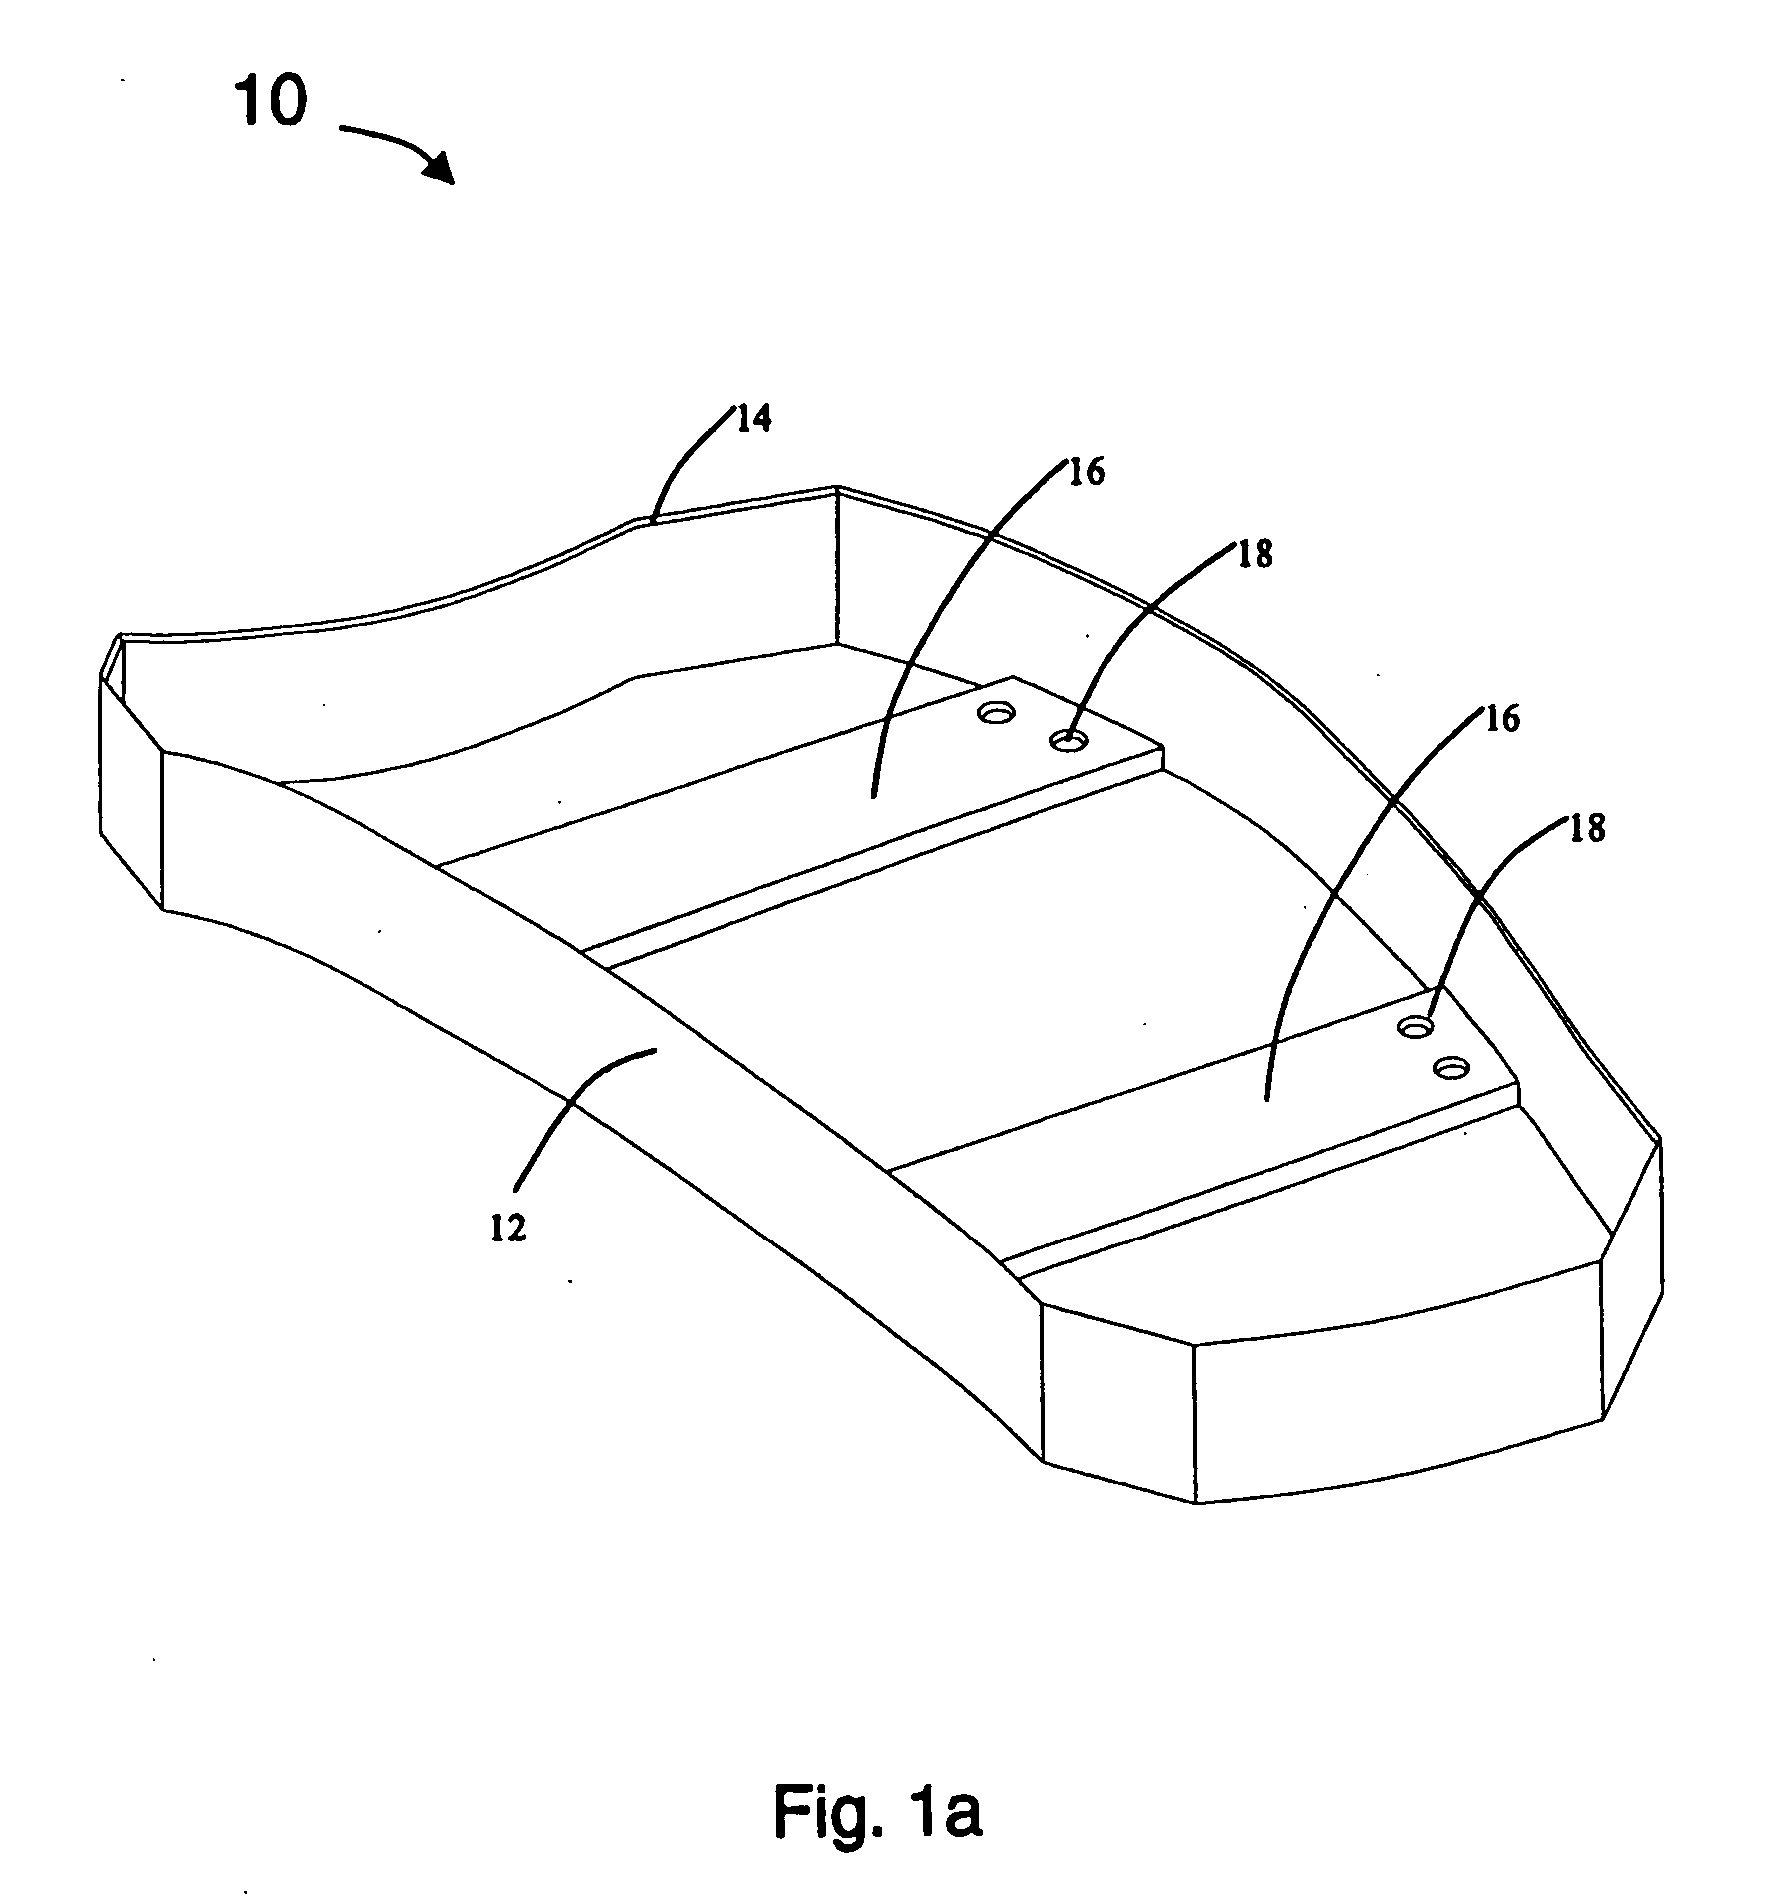 System and method for bending strip material to create cutting dies